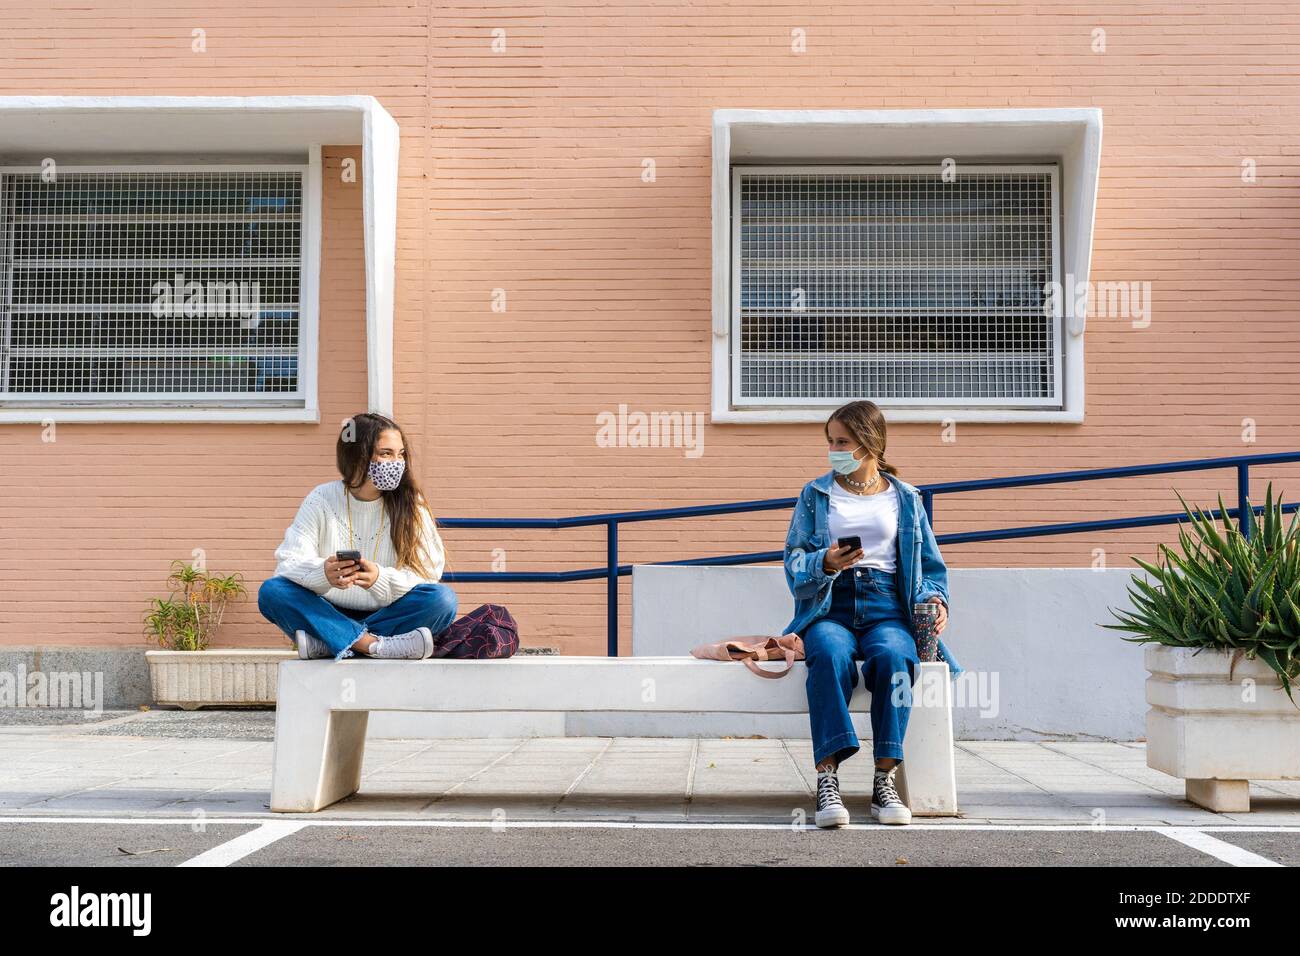 Female friends social distancing wearing protective face mask sitting on concrete bench Stock Photo